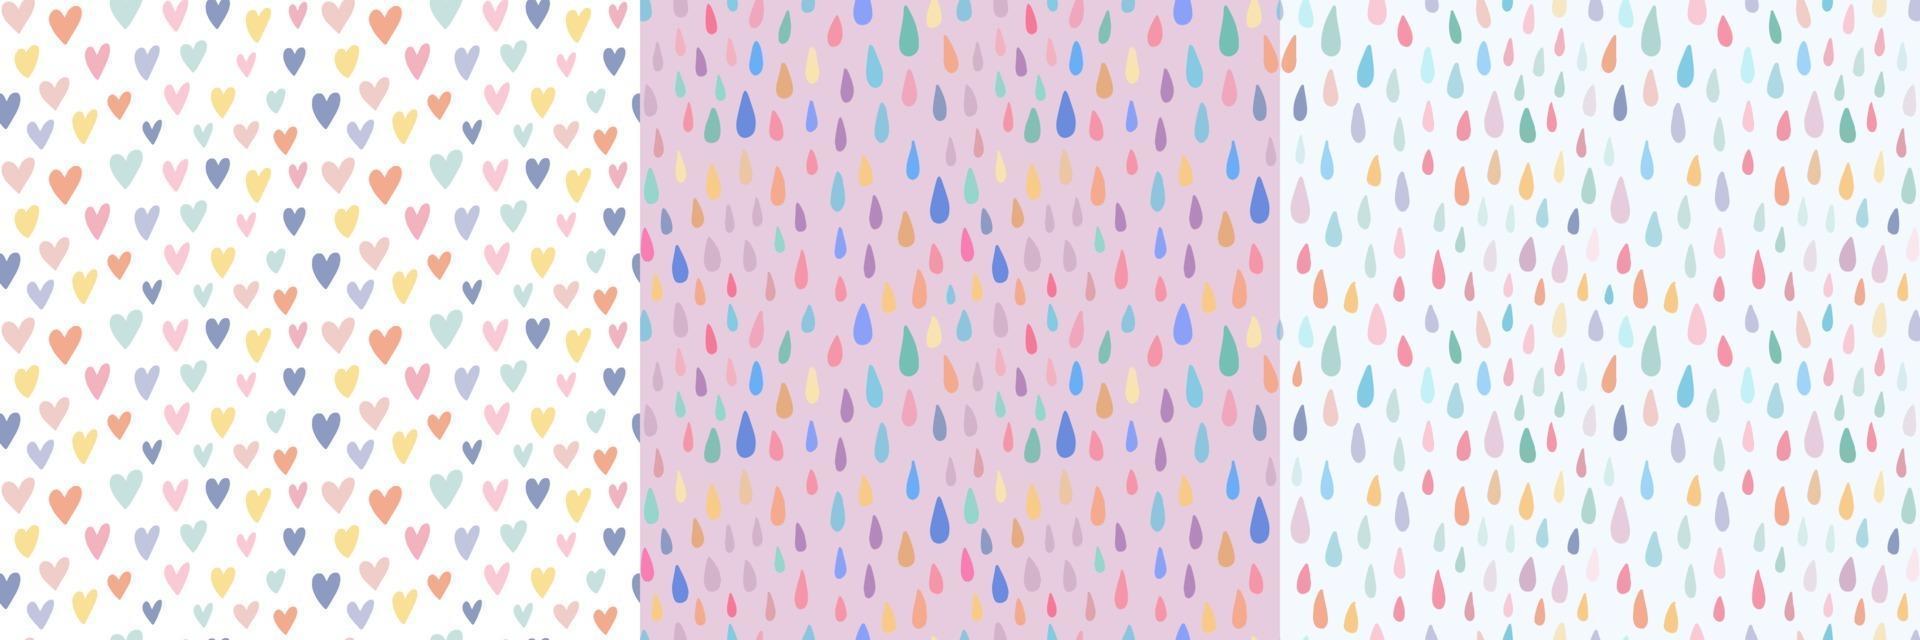 Set of three cute simple childish seamless pattern with hearts, rain vector